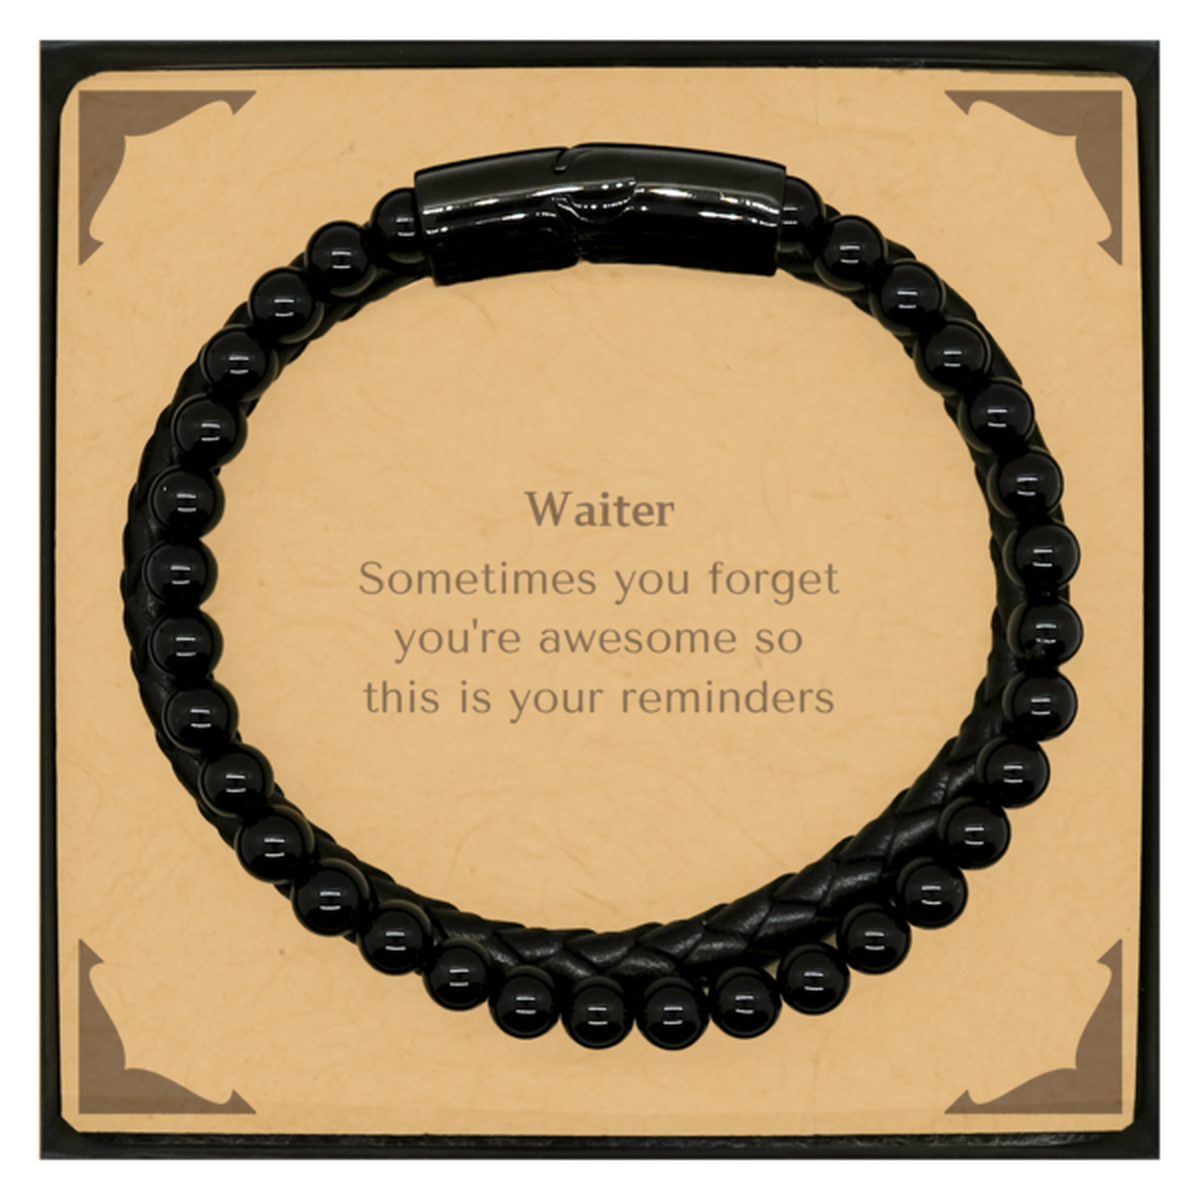 Sentimental Waiter Stone Leather Bracelets, Waiter Sometimes you forget you're awesome so this is your reminders, Graduation Christmas Birthday Gifts for Waiter, Men, Women, Coworkers